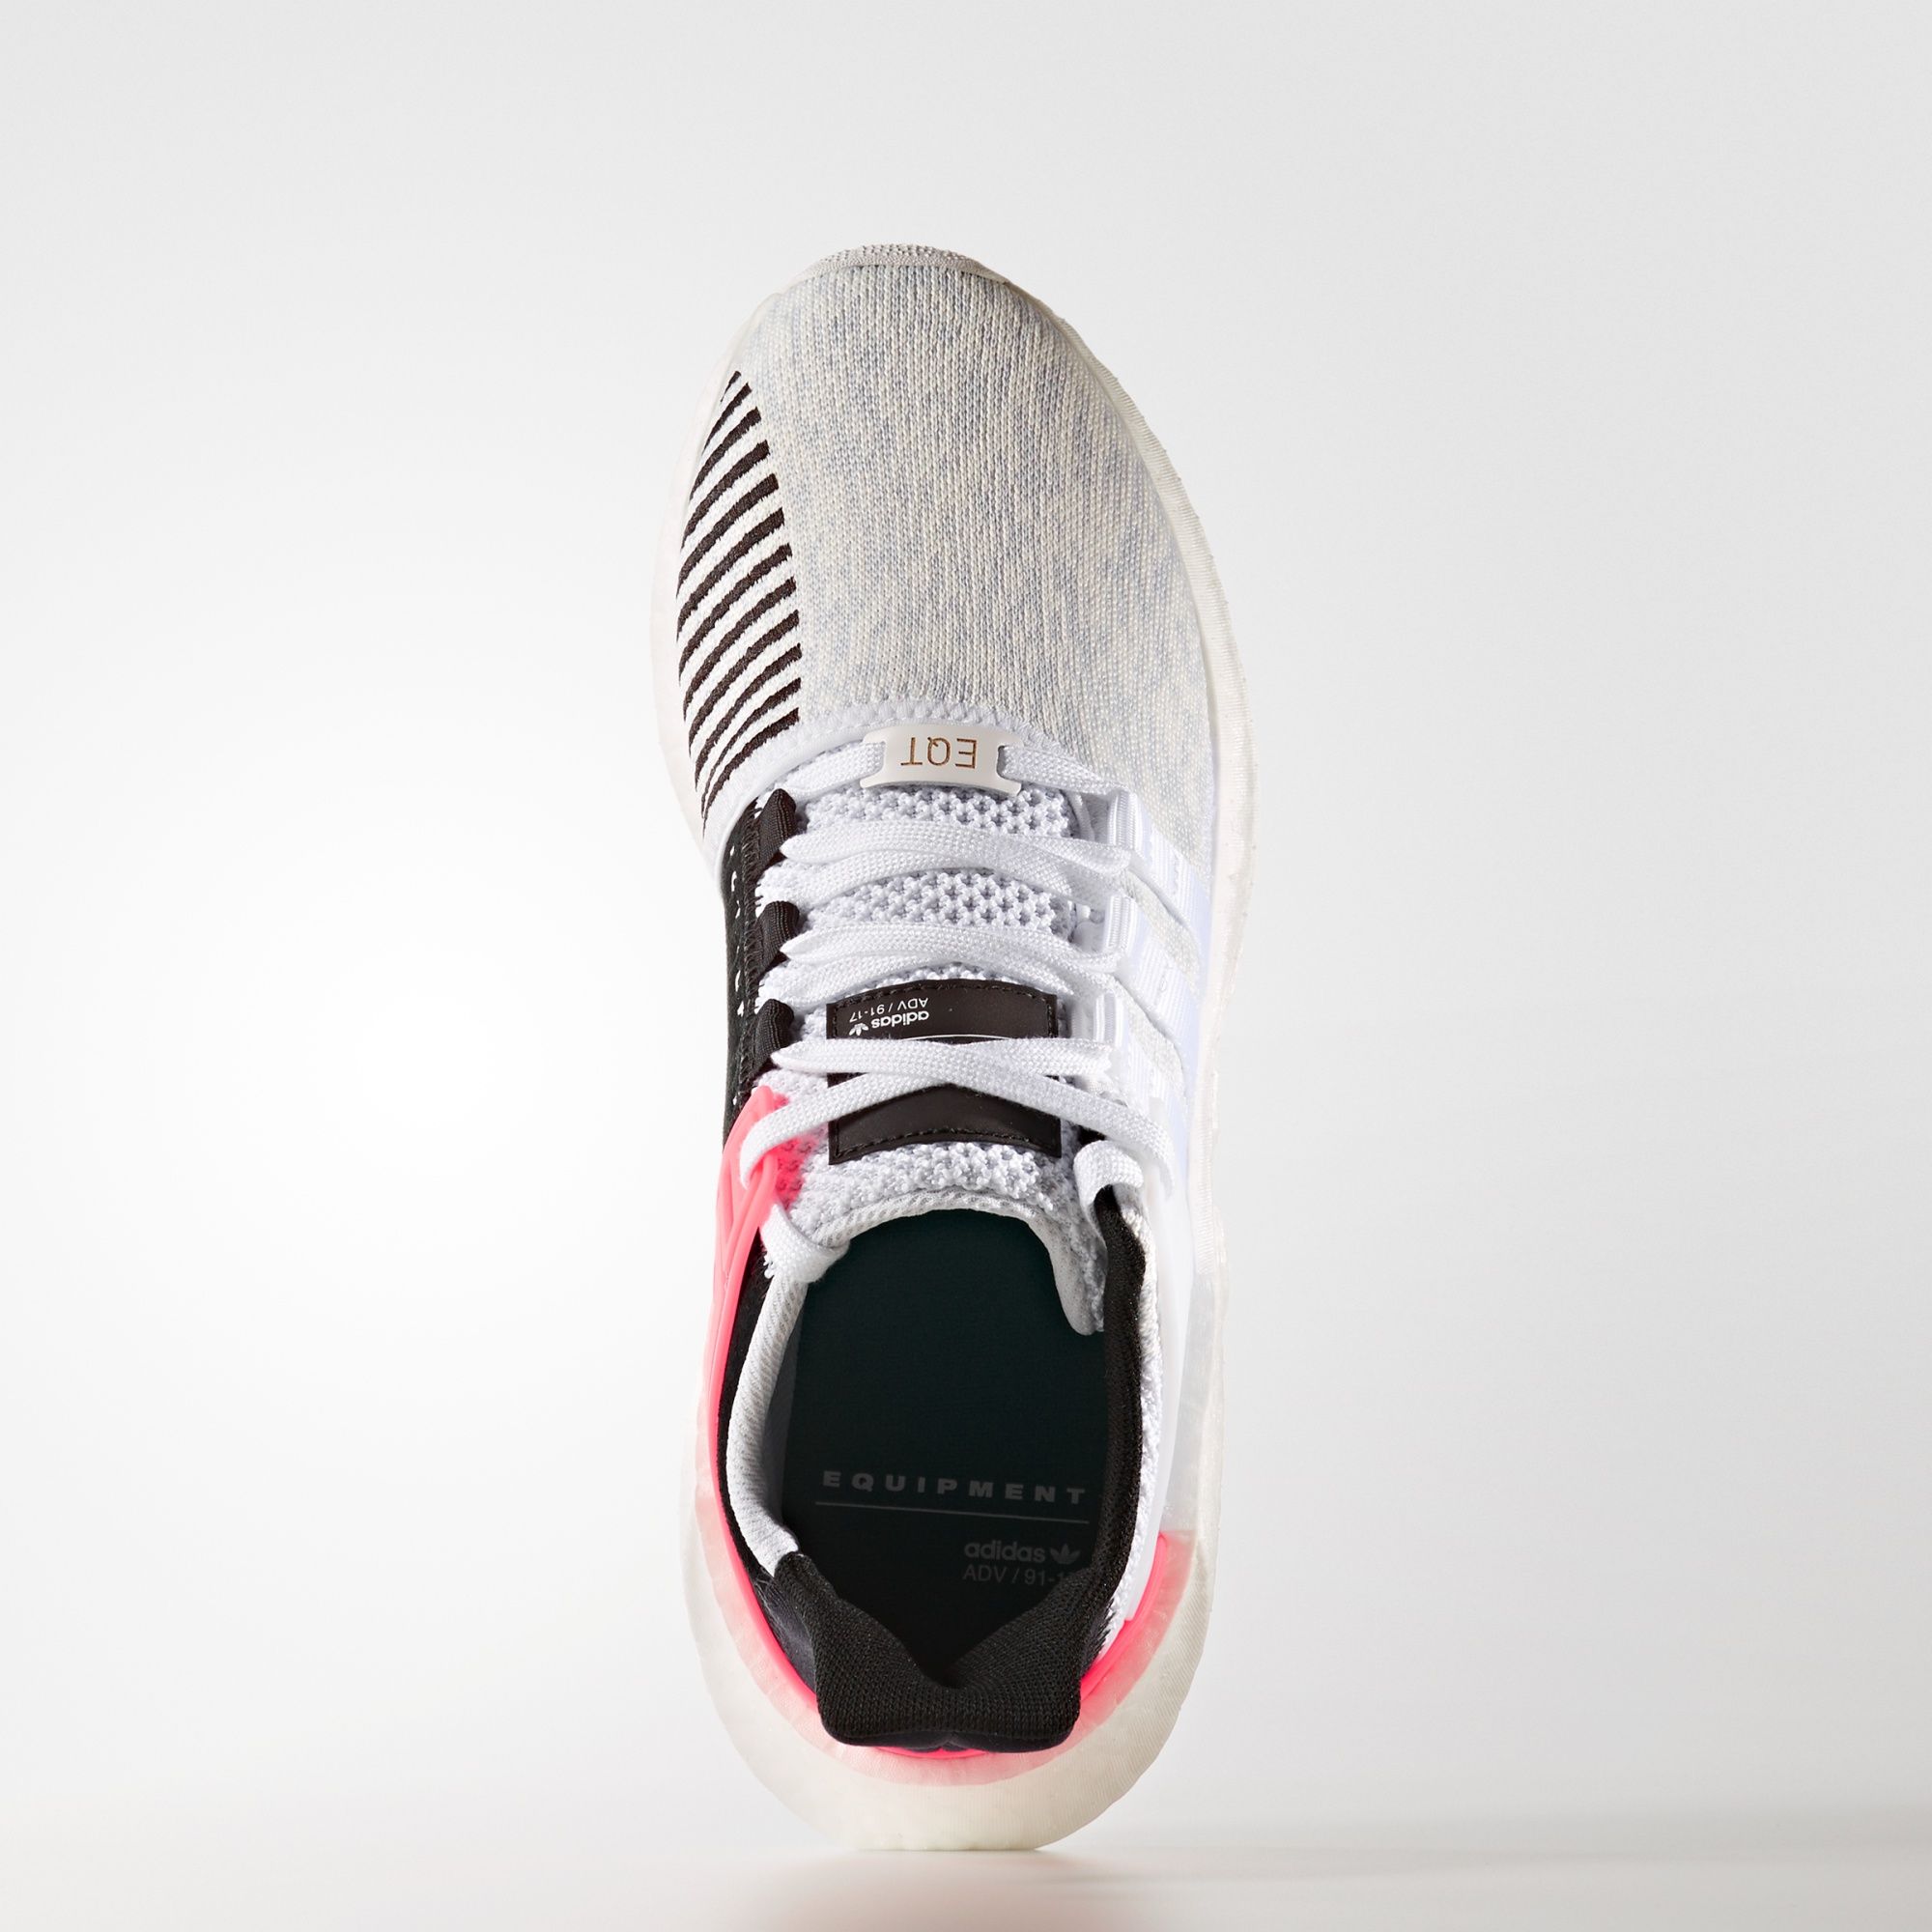 adidas-eqt-support-9317-white-turbo-red-4